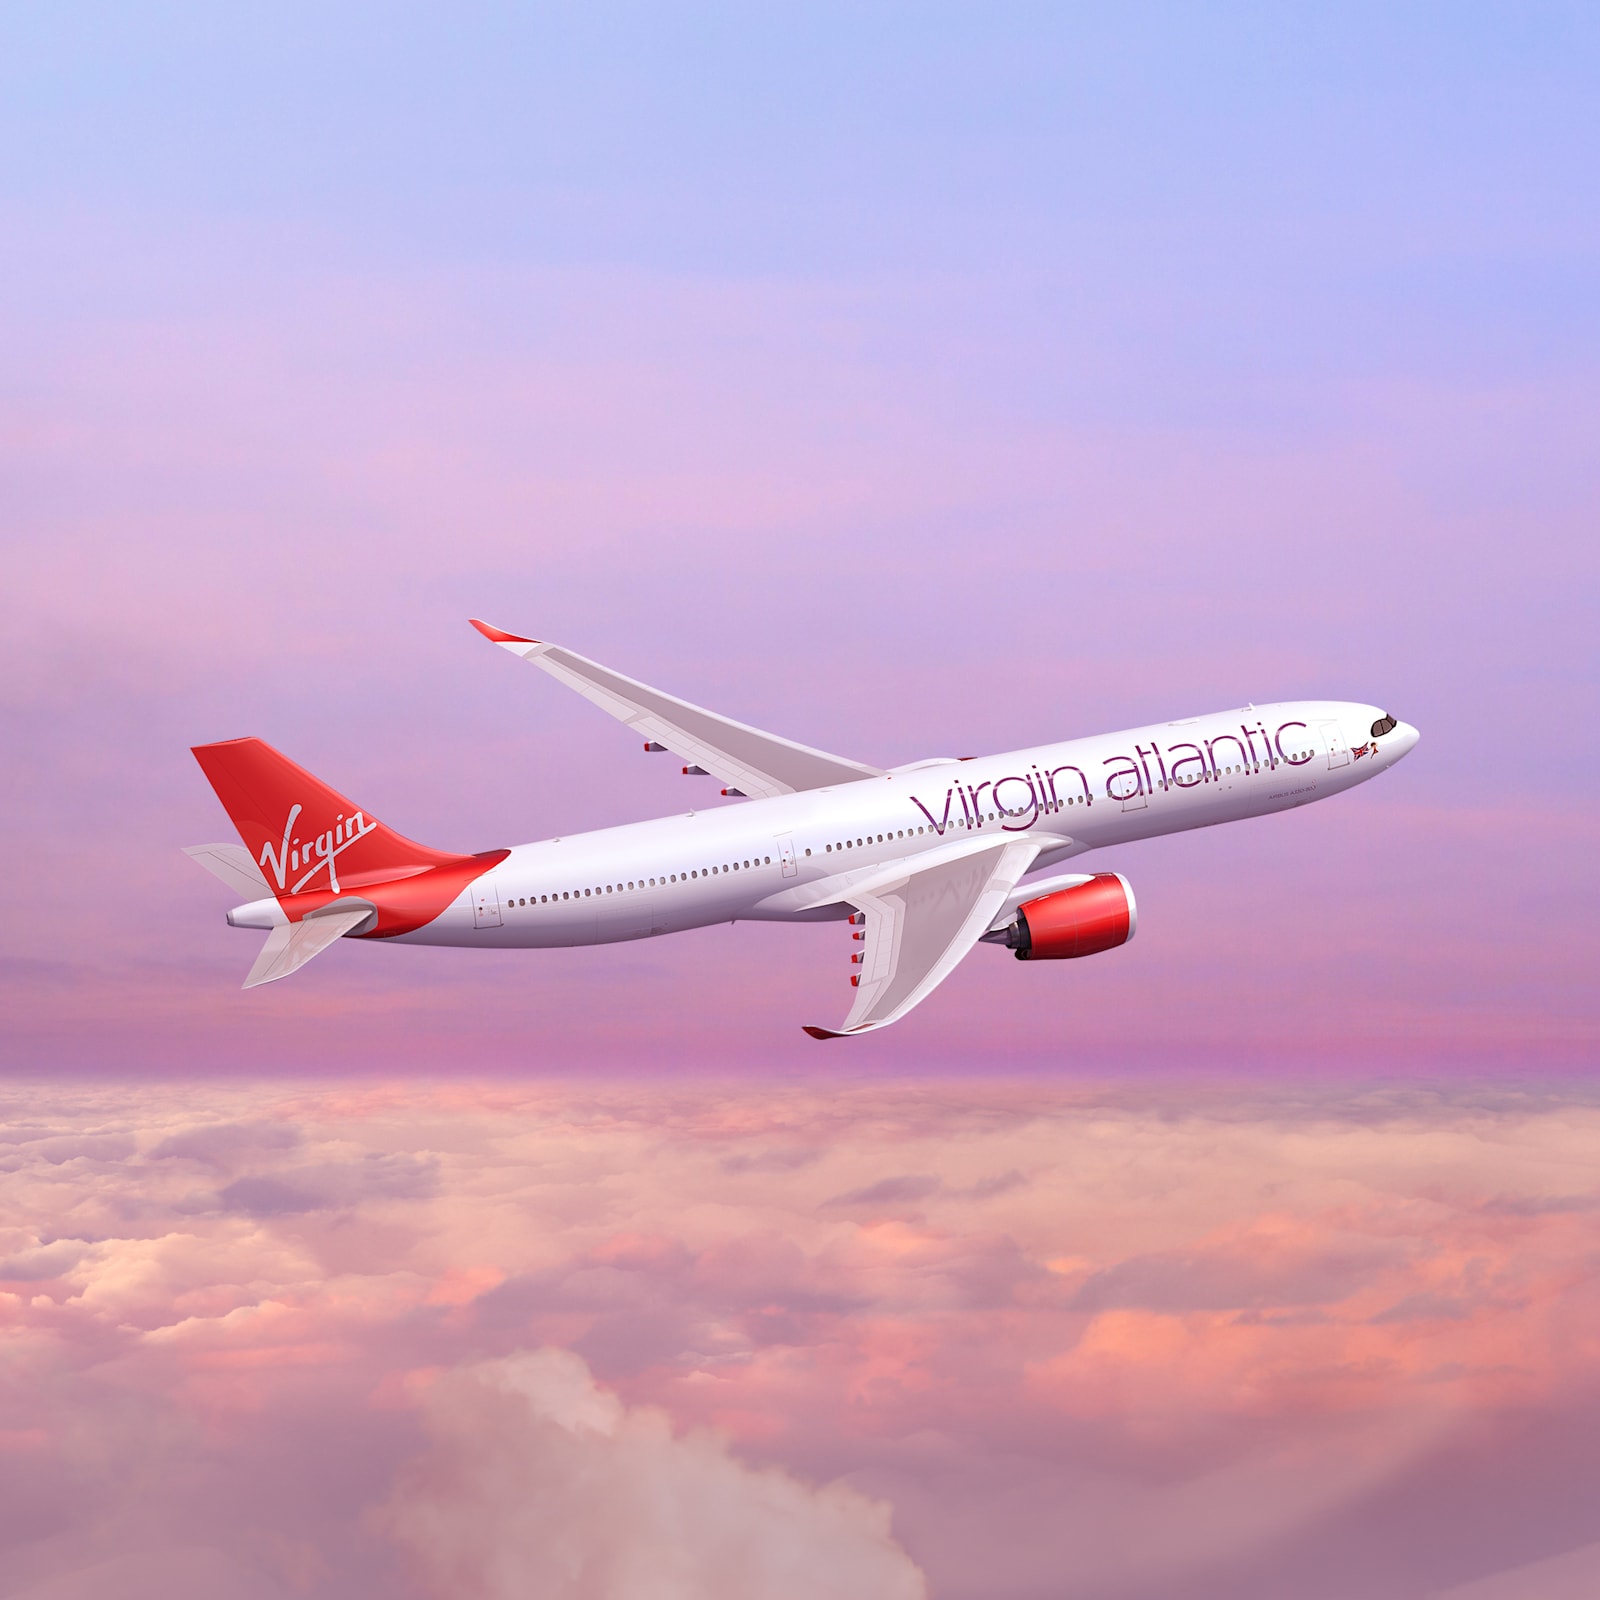 Virgin Atlantic resumes twilight check in service for Manchester passengers